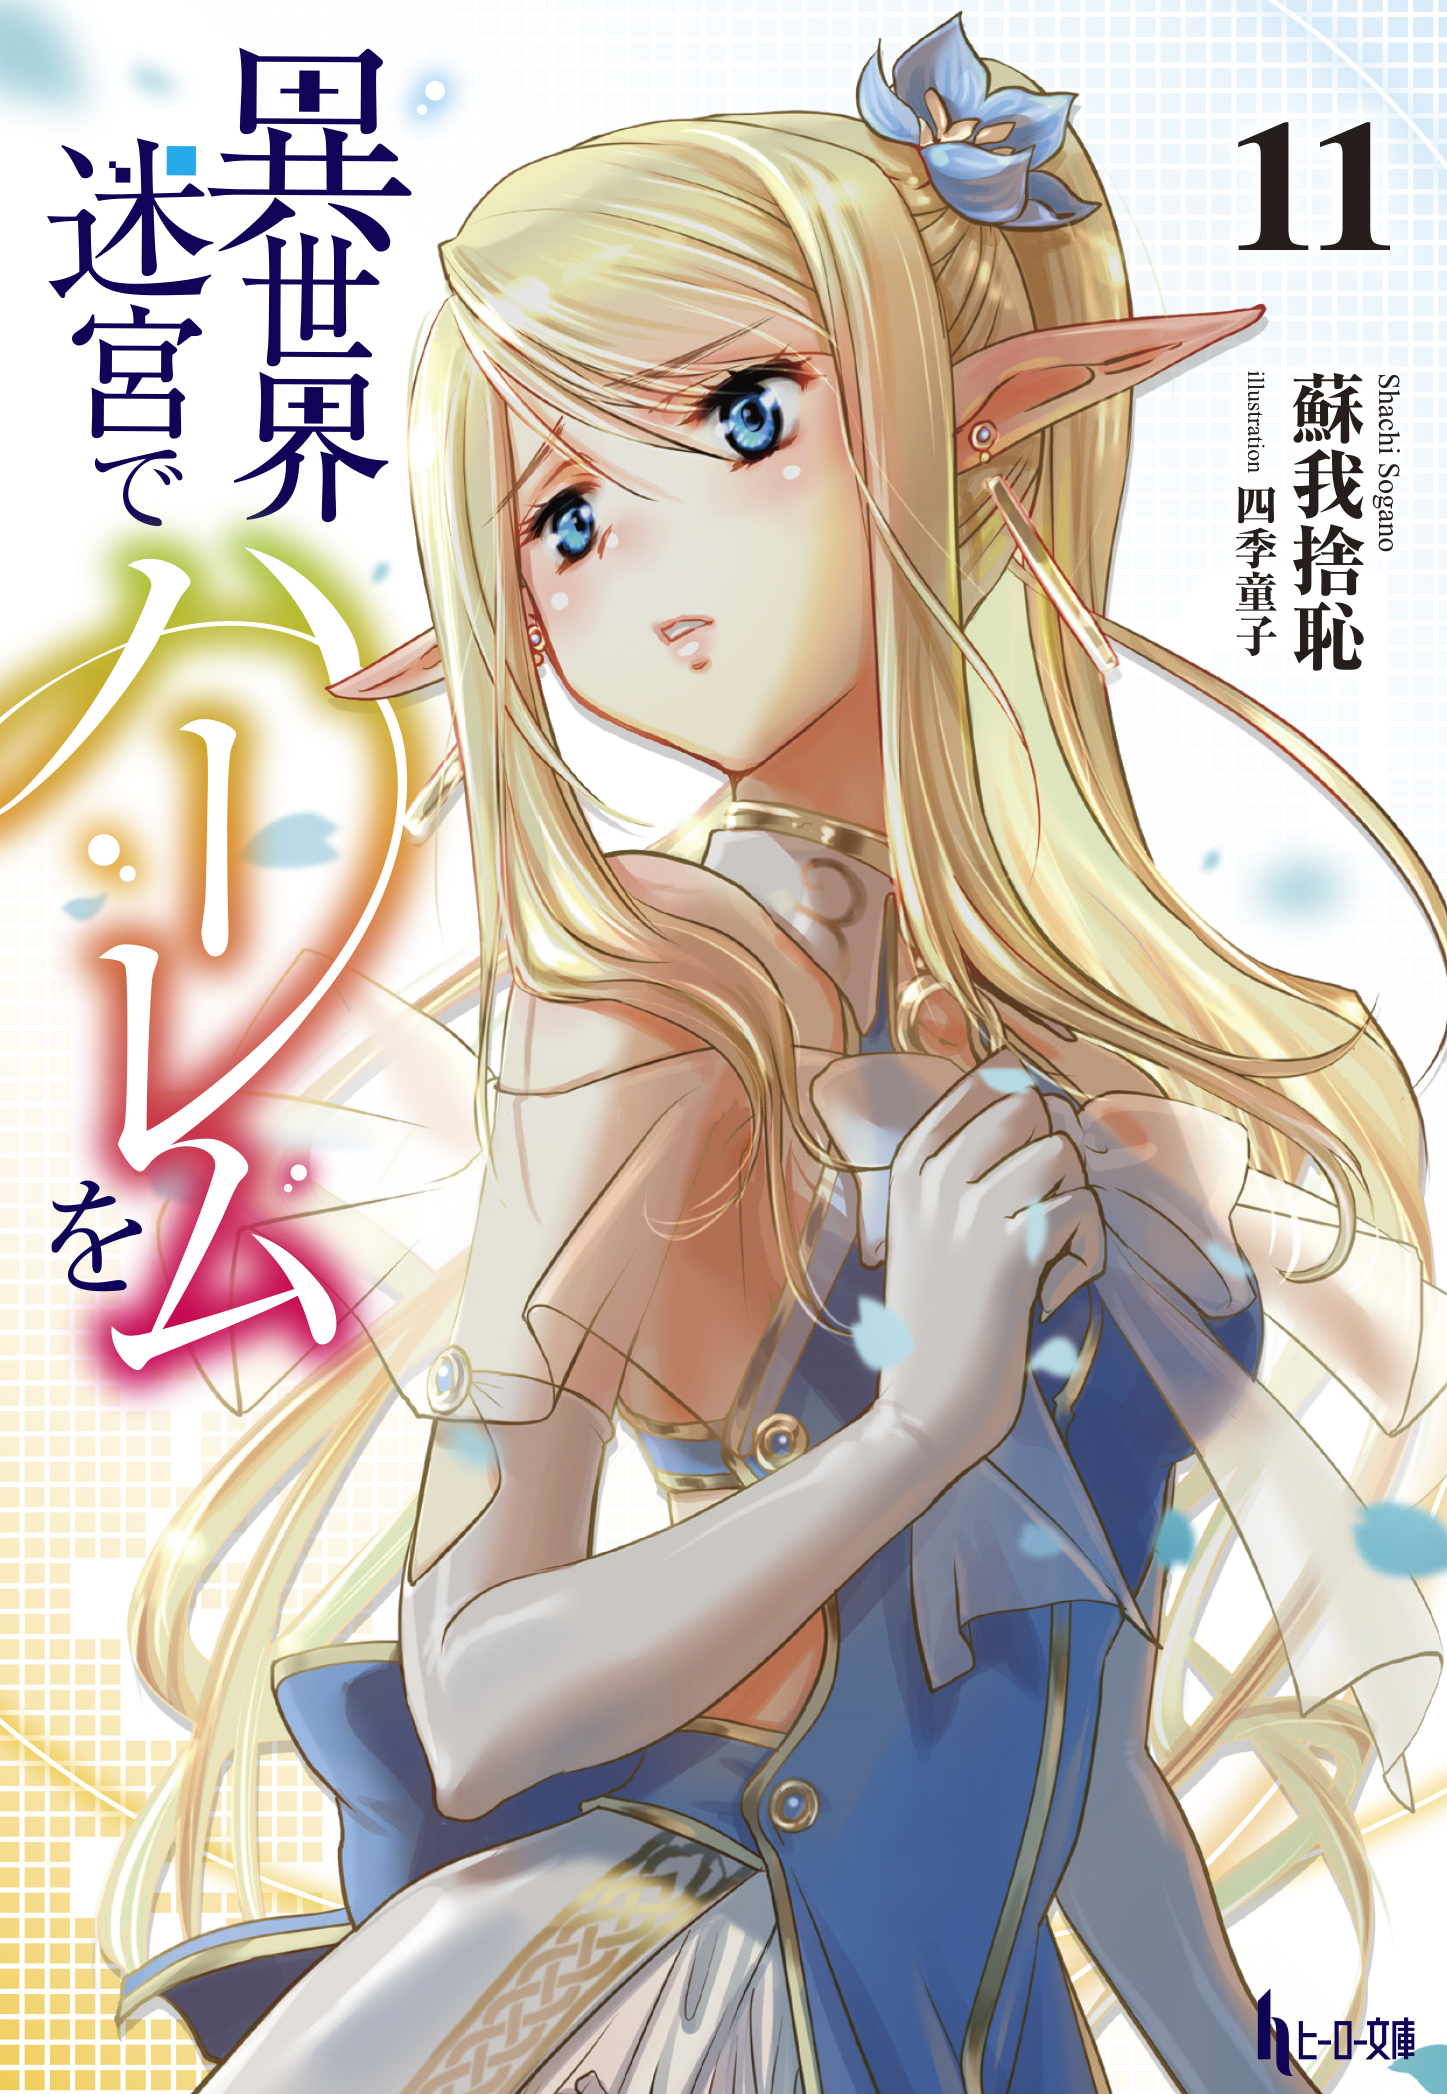 Category:Light Novels, Slave Harem in the Labyrinth of the Other World  Wiki